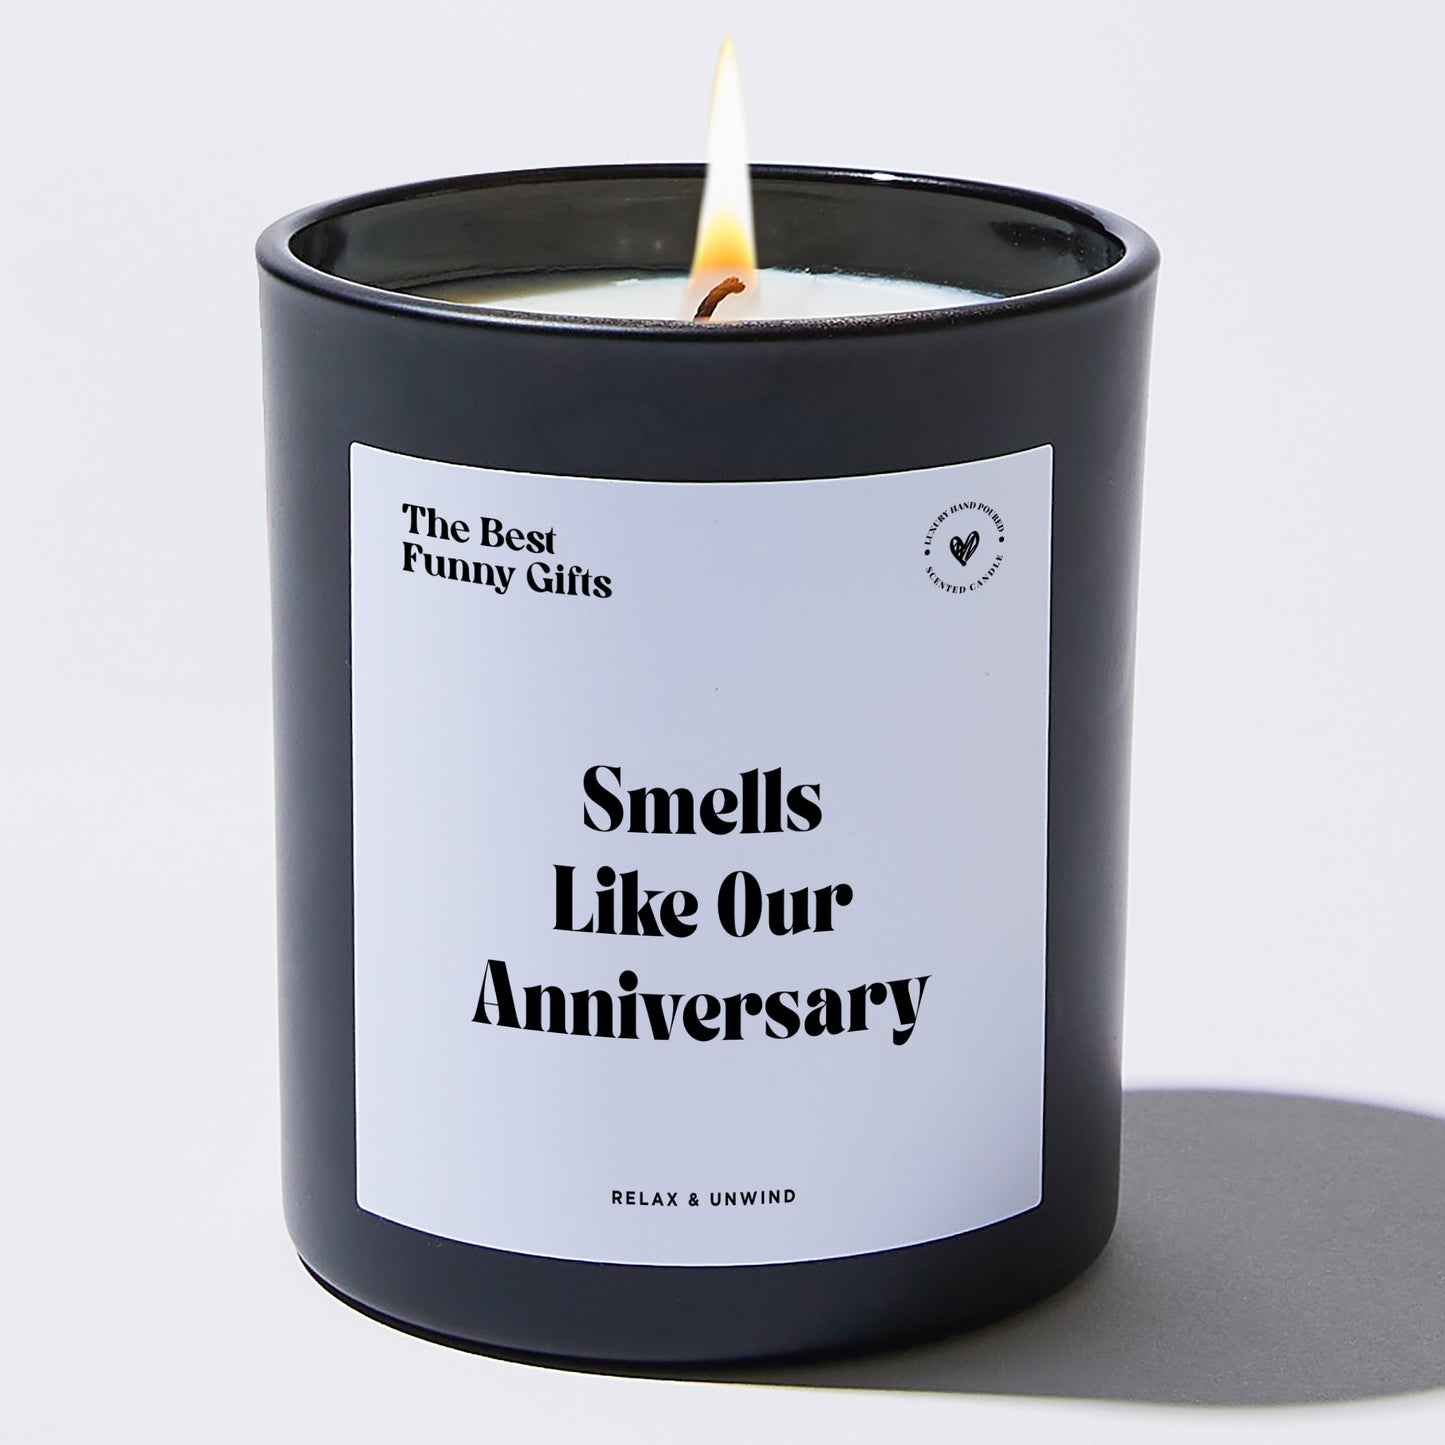 Anniversary Gift Smells Like Our Anniversary - The Best Funny Gifts